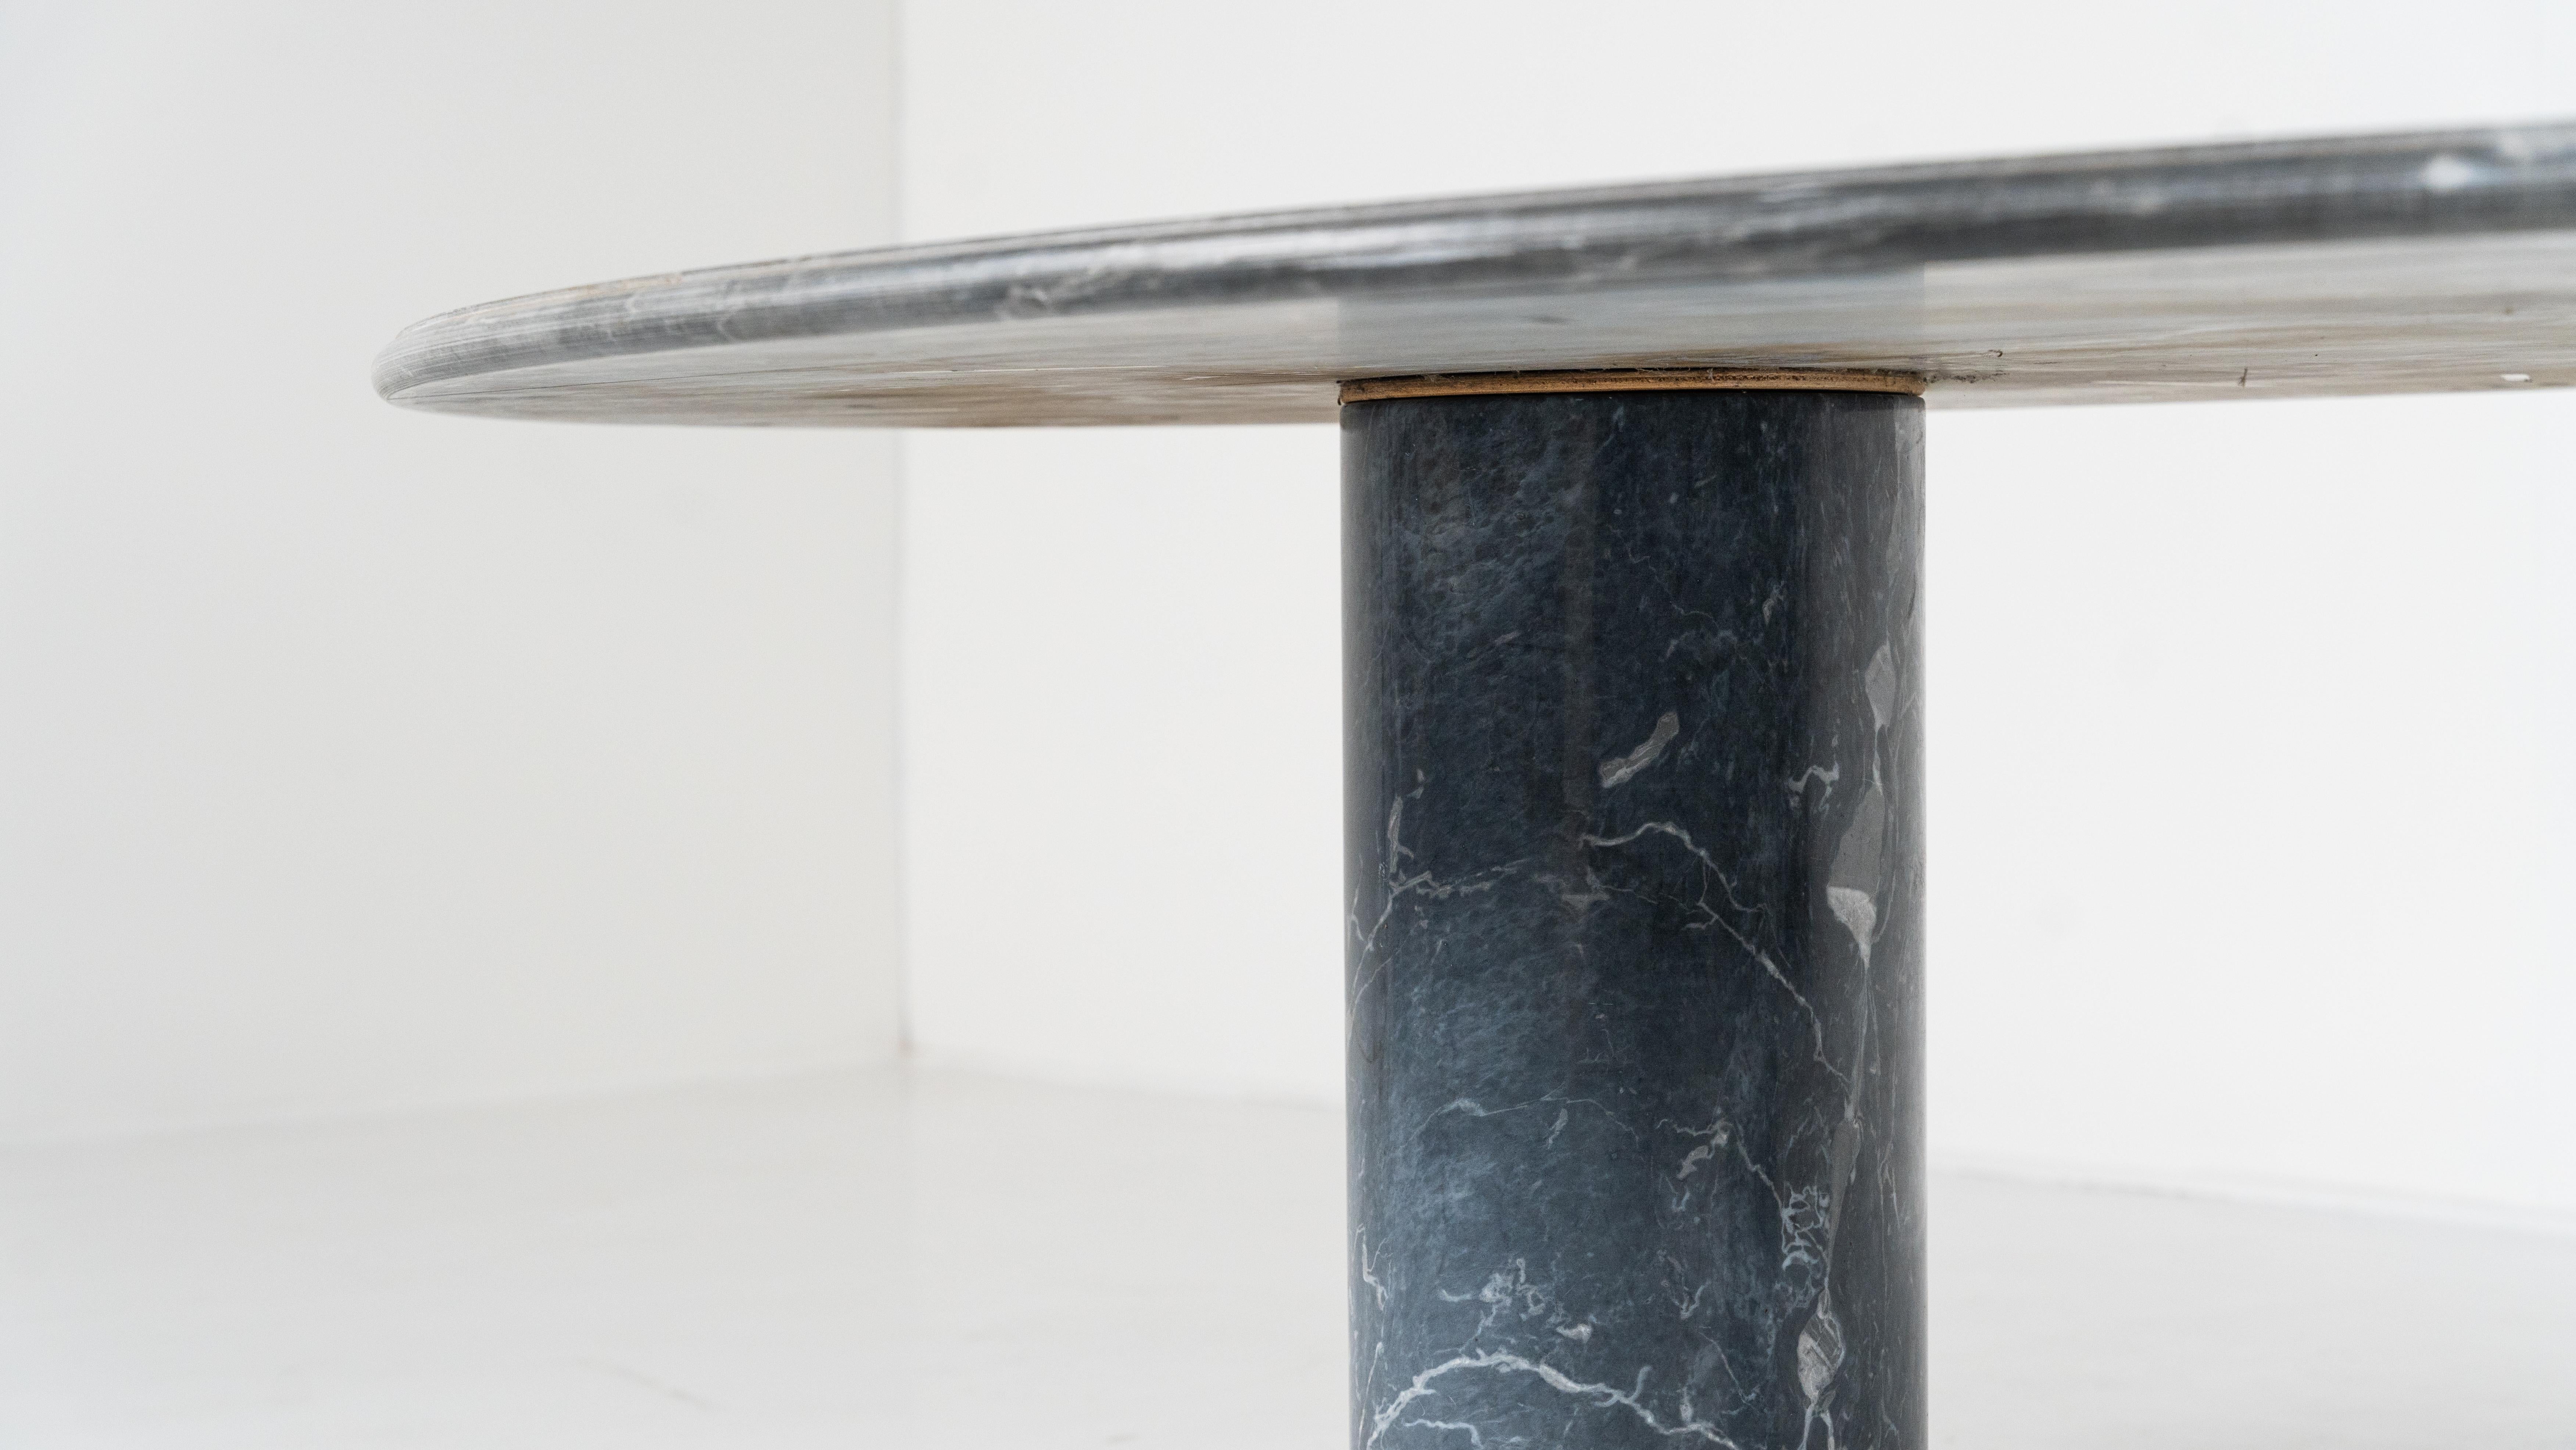 Ovale del Giardiniere Table by Achille Castiglioni for Upgroup, Marble, 1980s For Sale 4